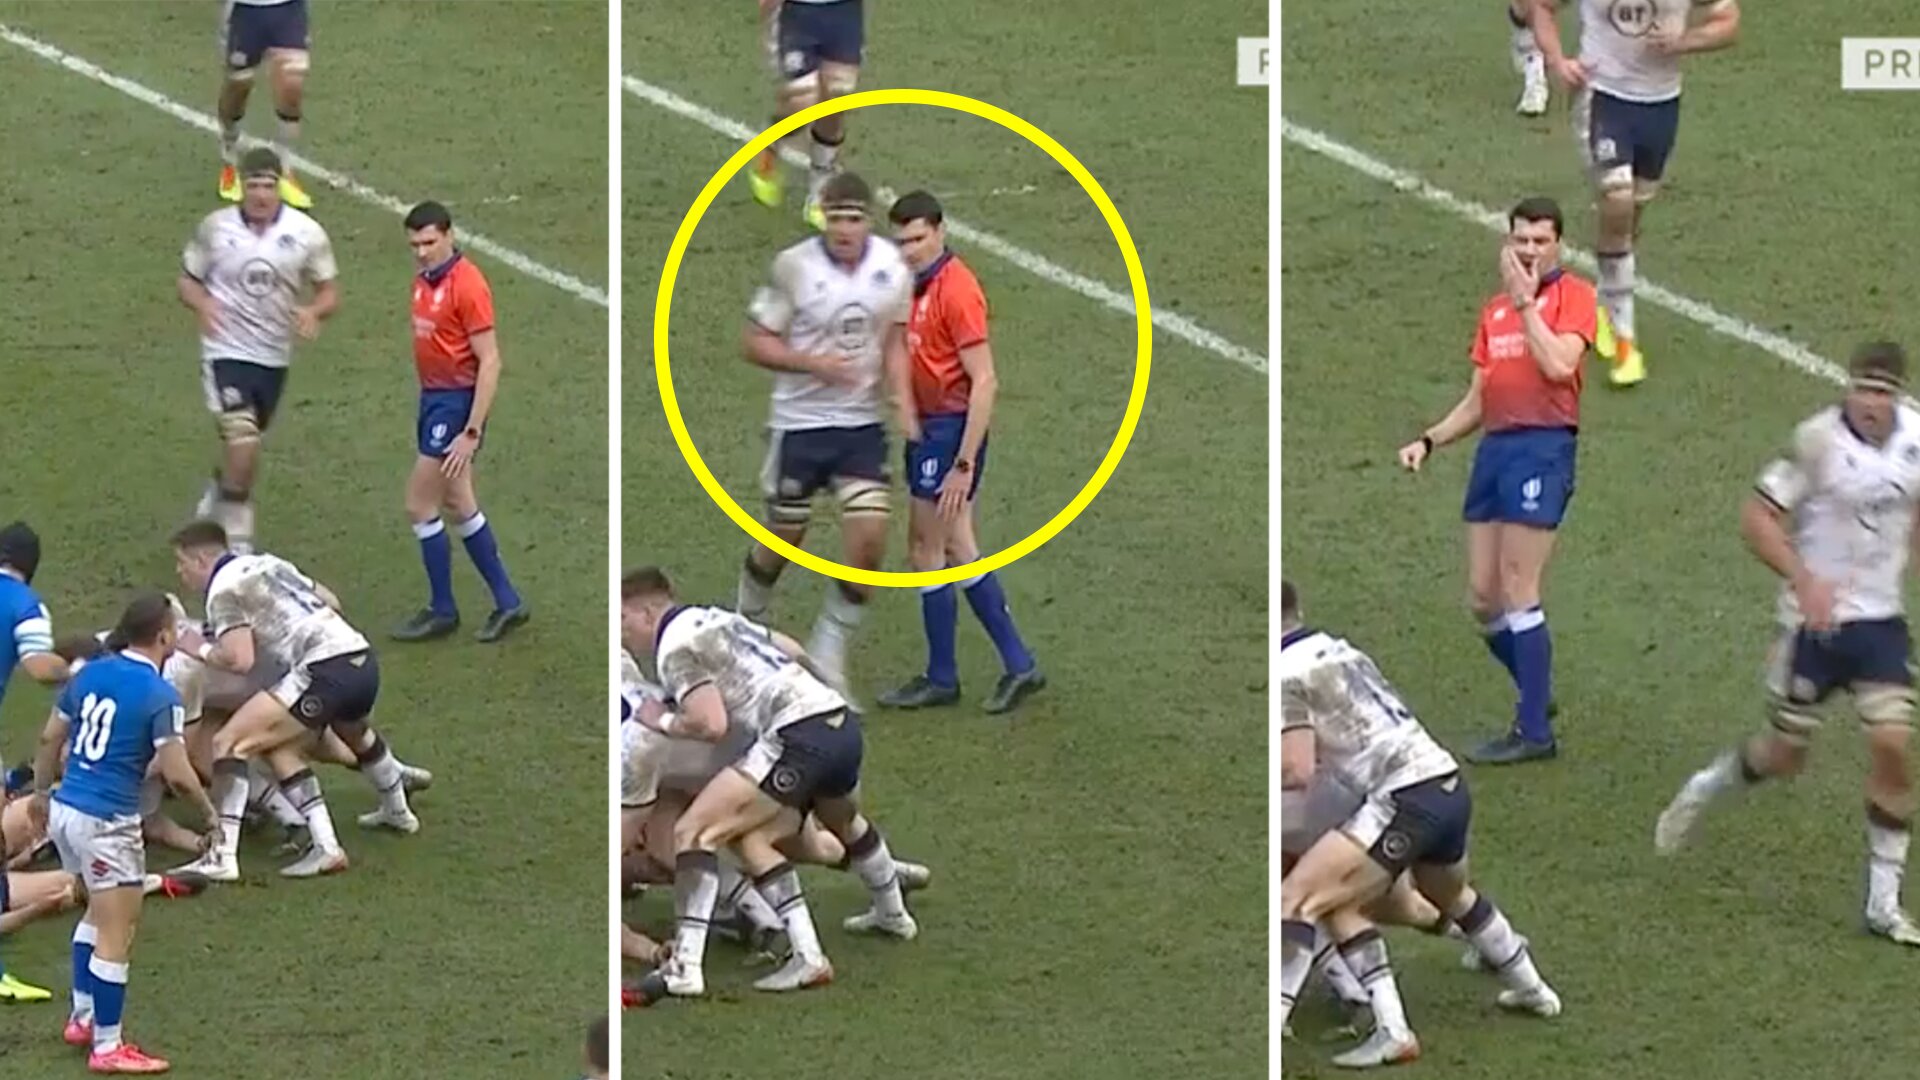 Scotland exposed having English rugby mole as Pascal Gauzere is ambushed in game